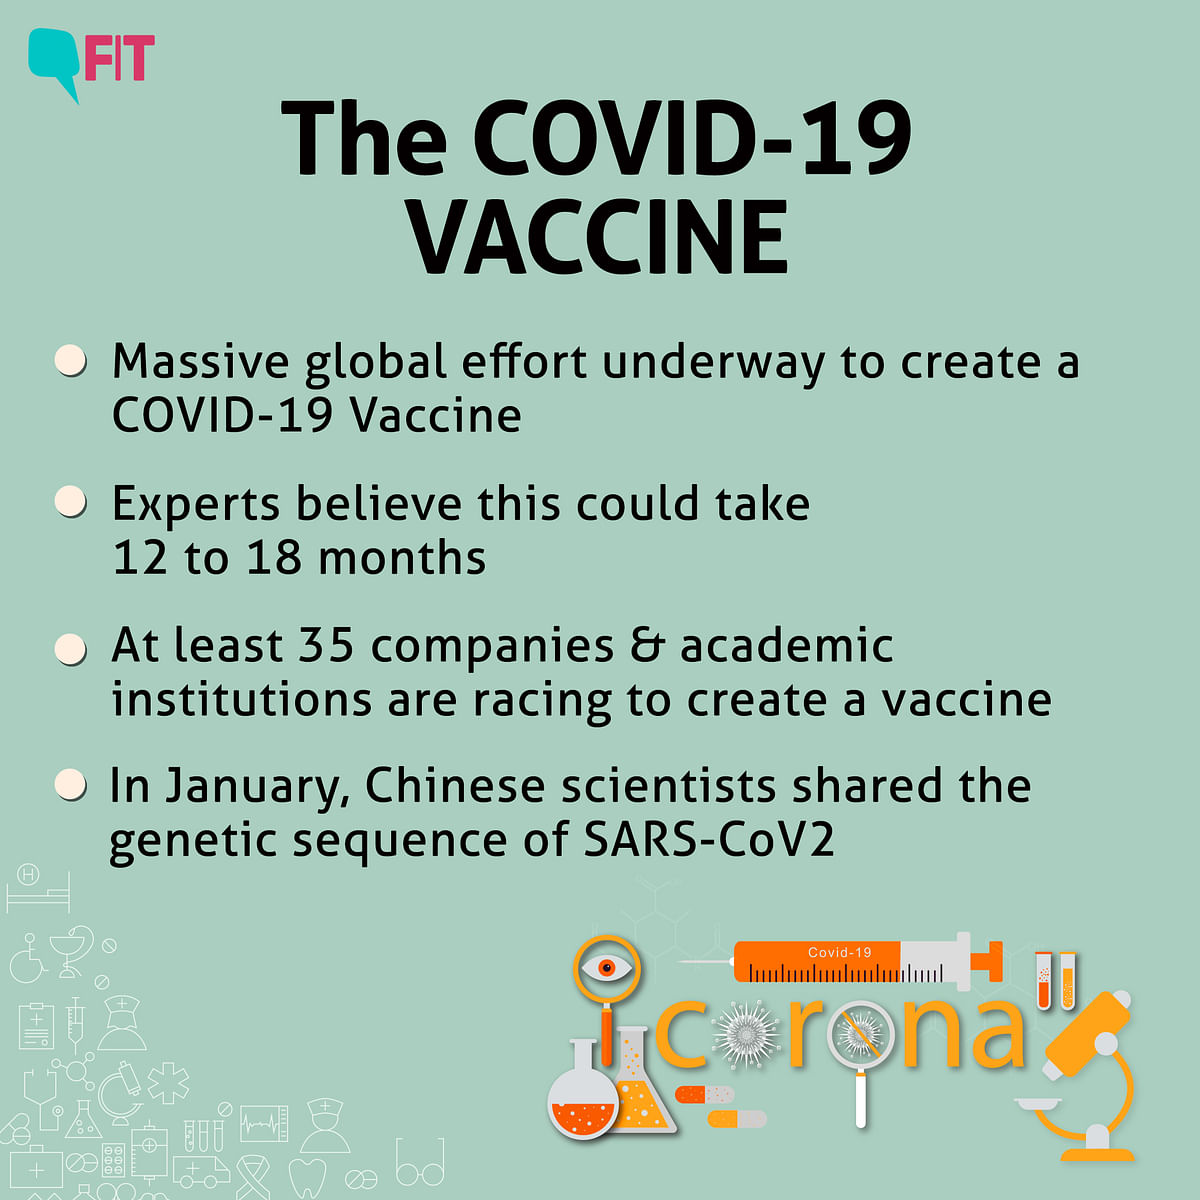 How Long Do We Have to Wait for COVID-19 Vaccine?